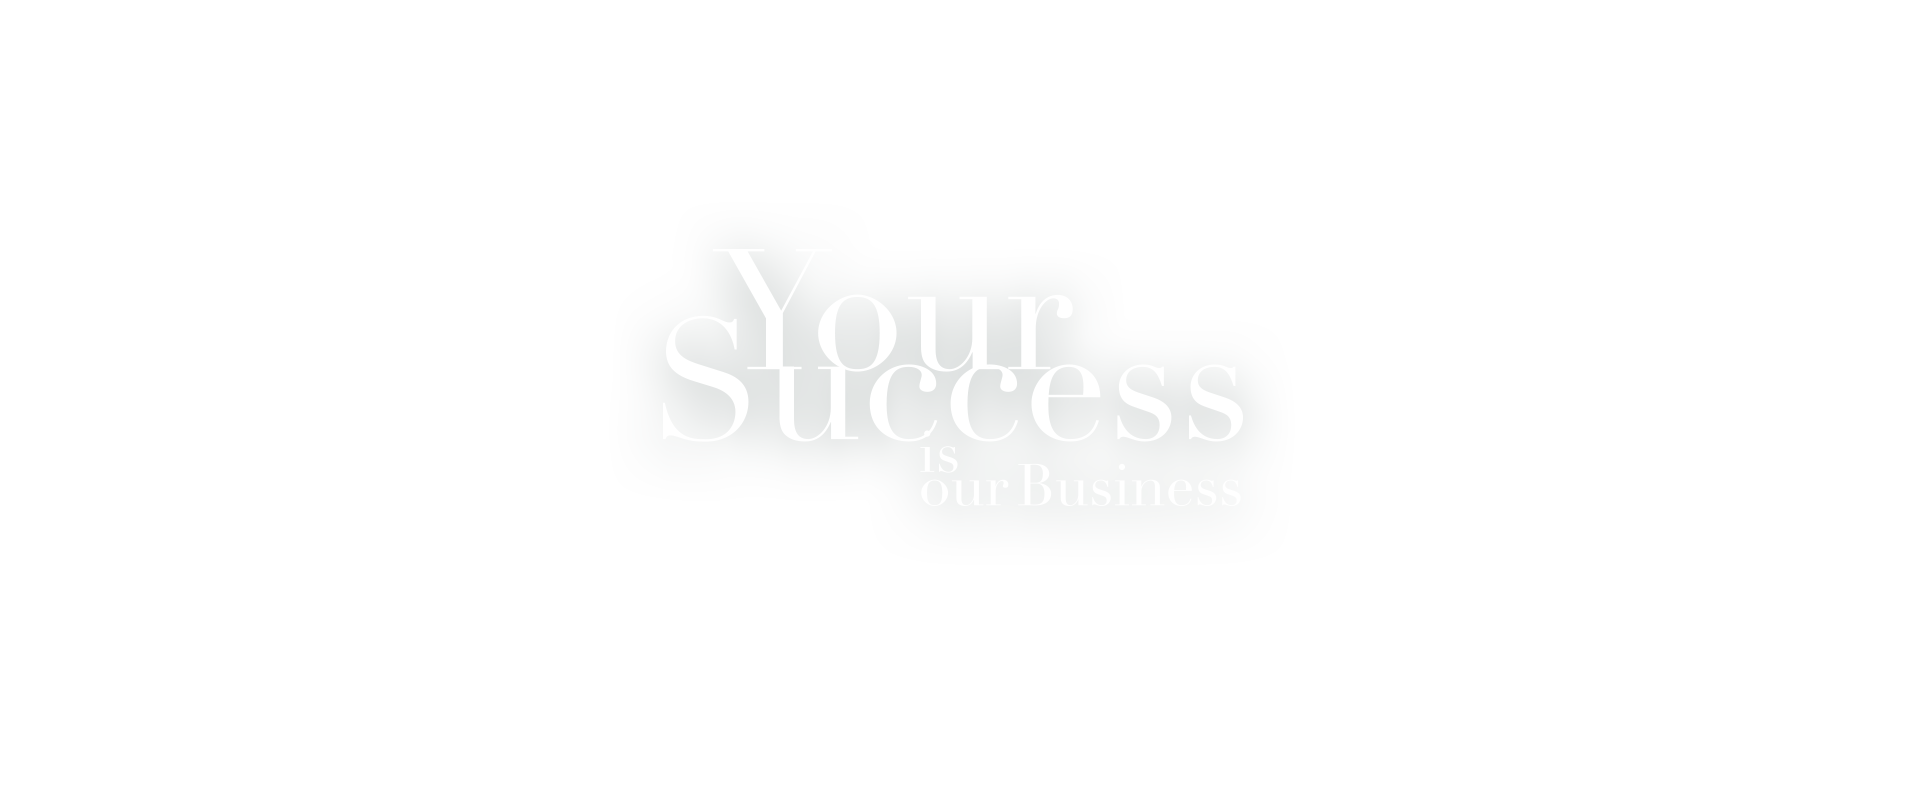 Your success is our business.